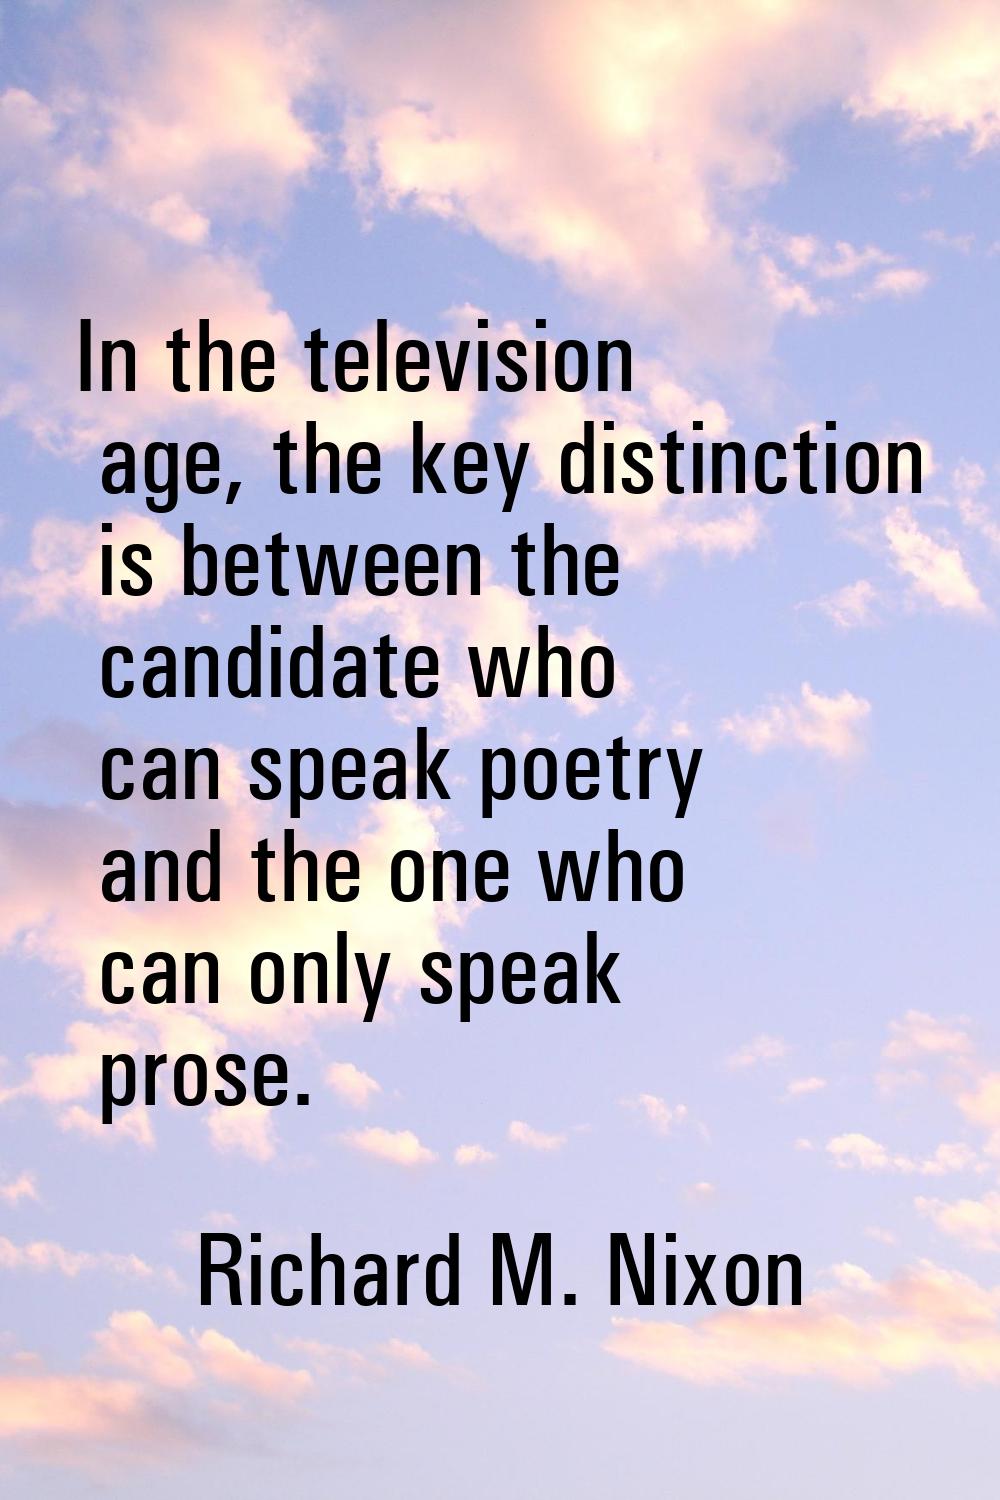 In the television age, the key distinction is between the candidate who can speak poetry and the on